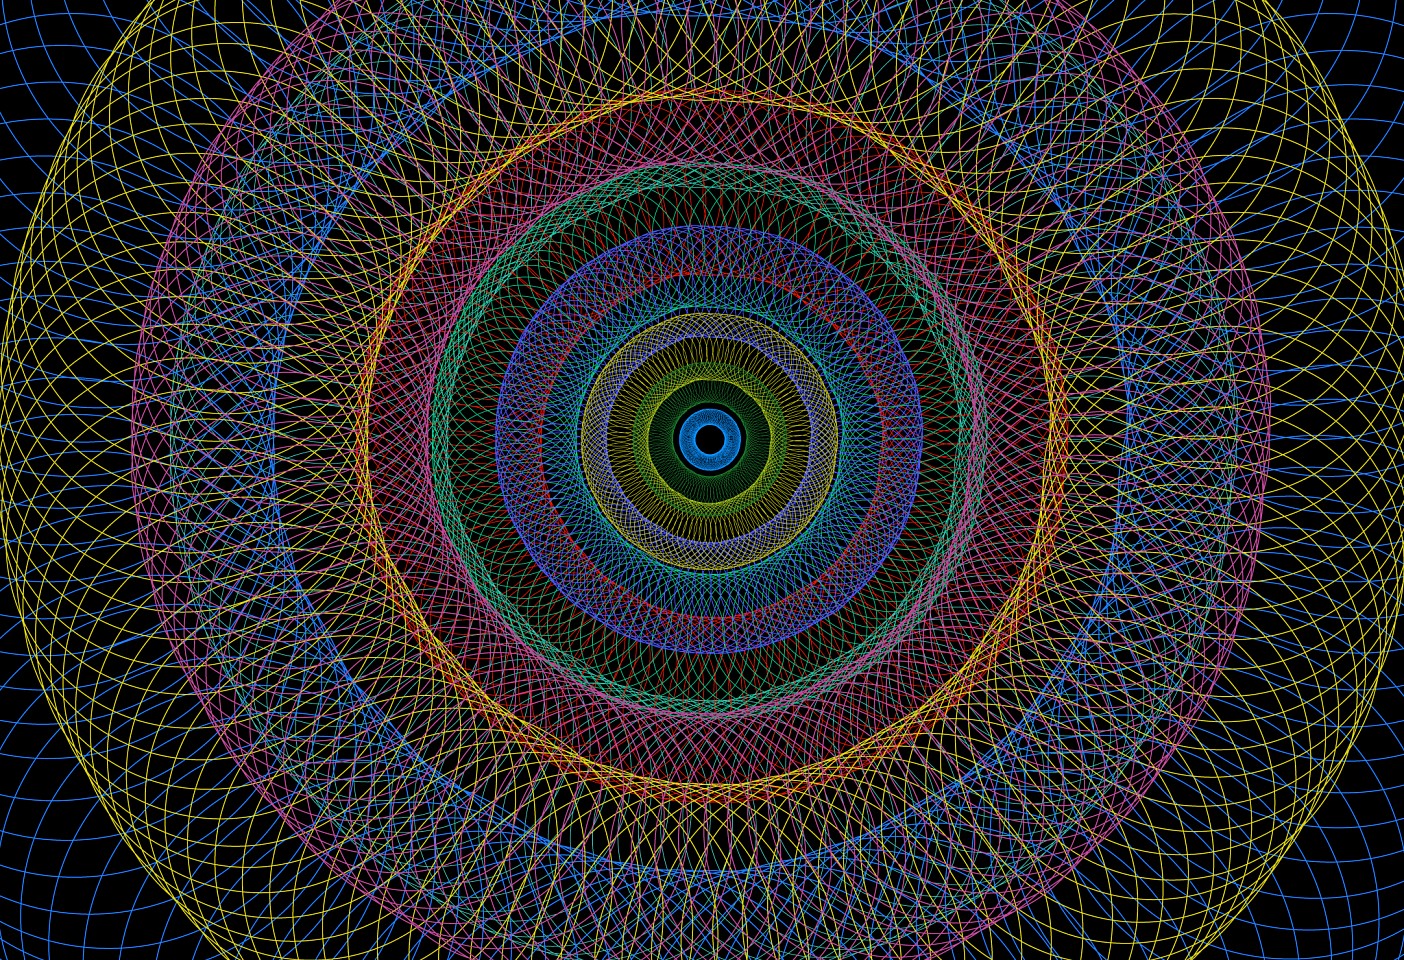 Dane Albert, Circles #36 Night, 2023
Acrylic on canvas (Concept), 48 x 72 in. (121.9 x 182.9 cm)
Series of colored lines and shapes in multiple configurations
DA.2023-036-night